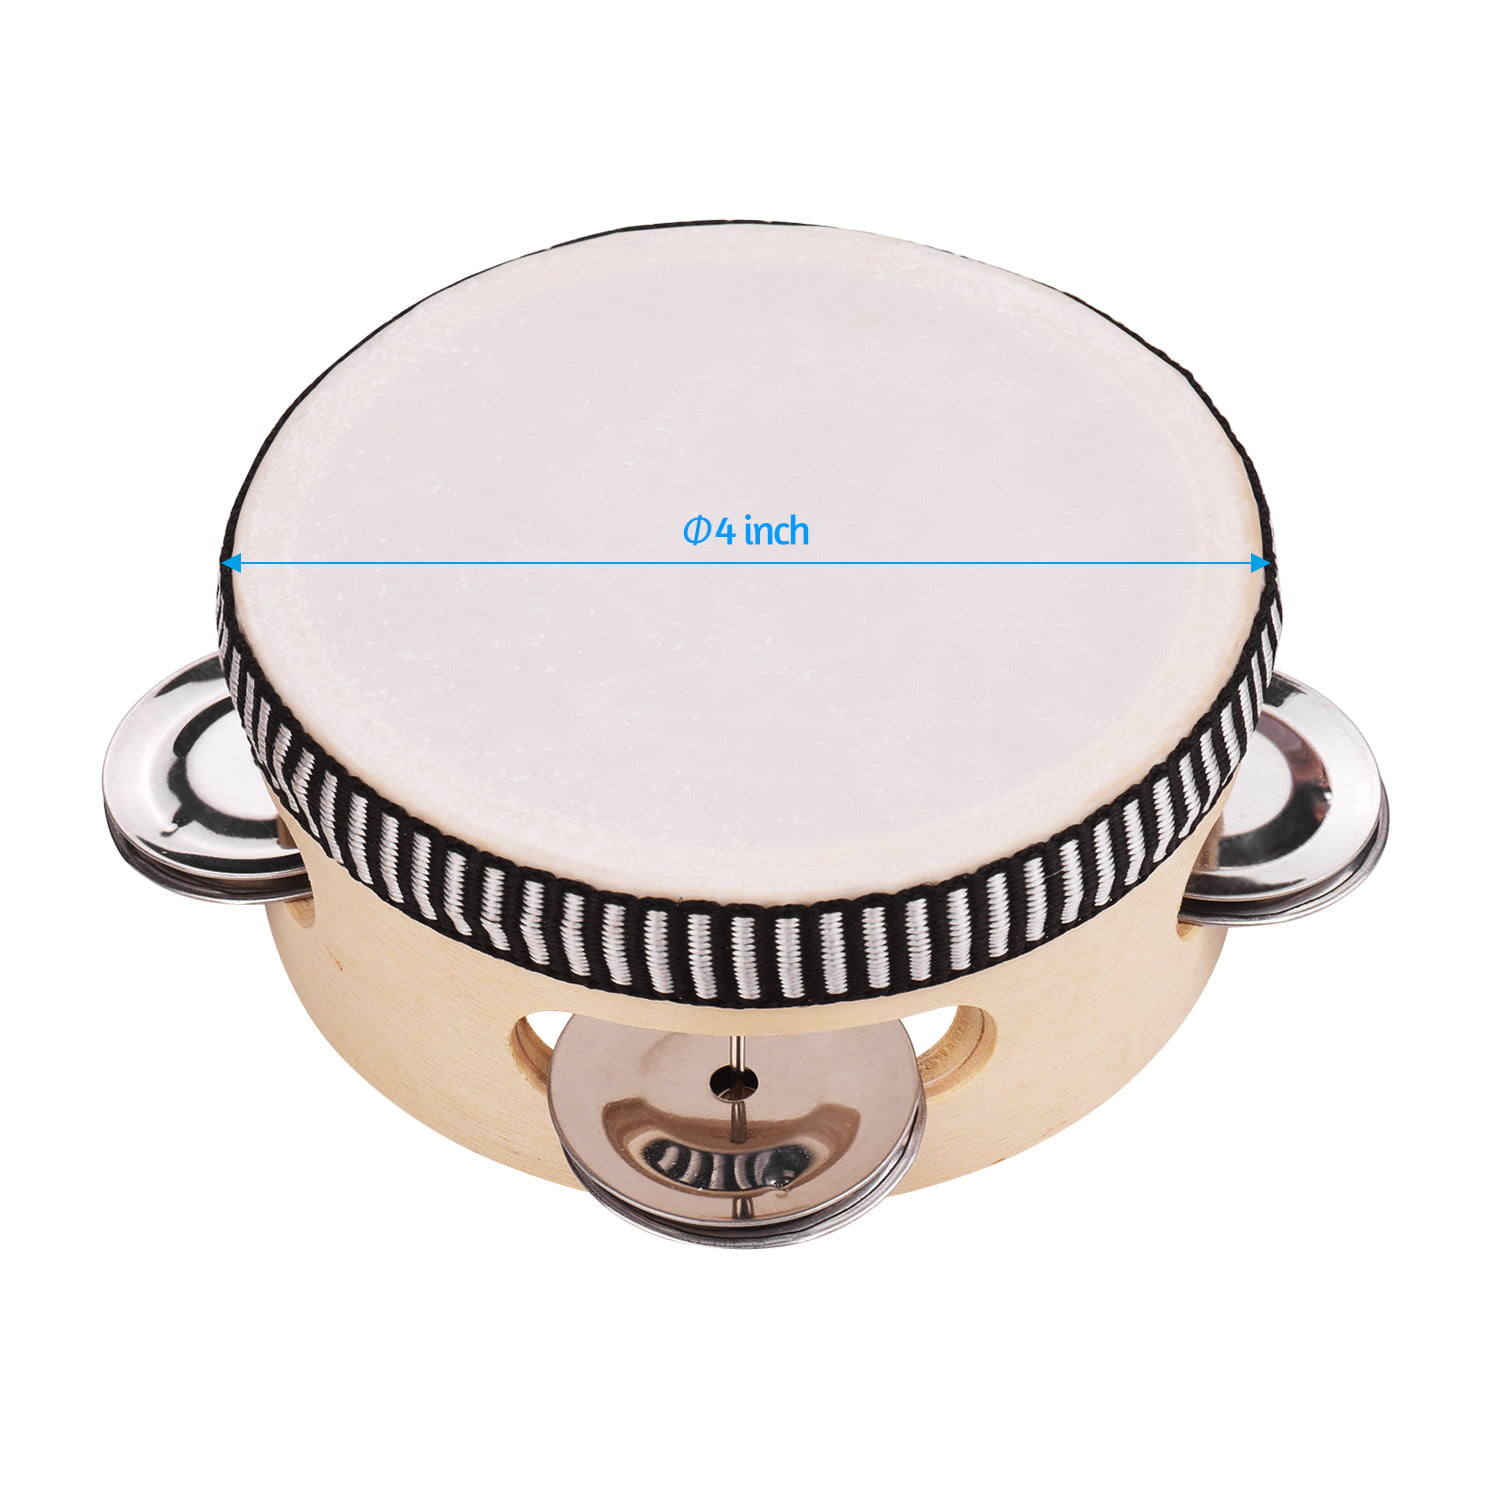 2 Pieces Wood Handheld Tambourine 8 inch Hand Held Drum Tambourines with Jingles Bells Percussion Musical Educational Toy Instrument 